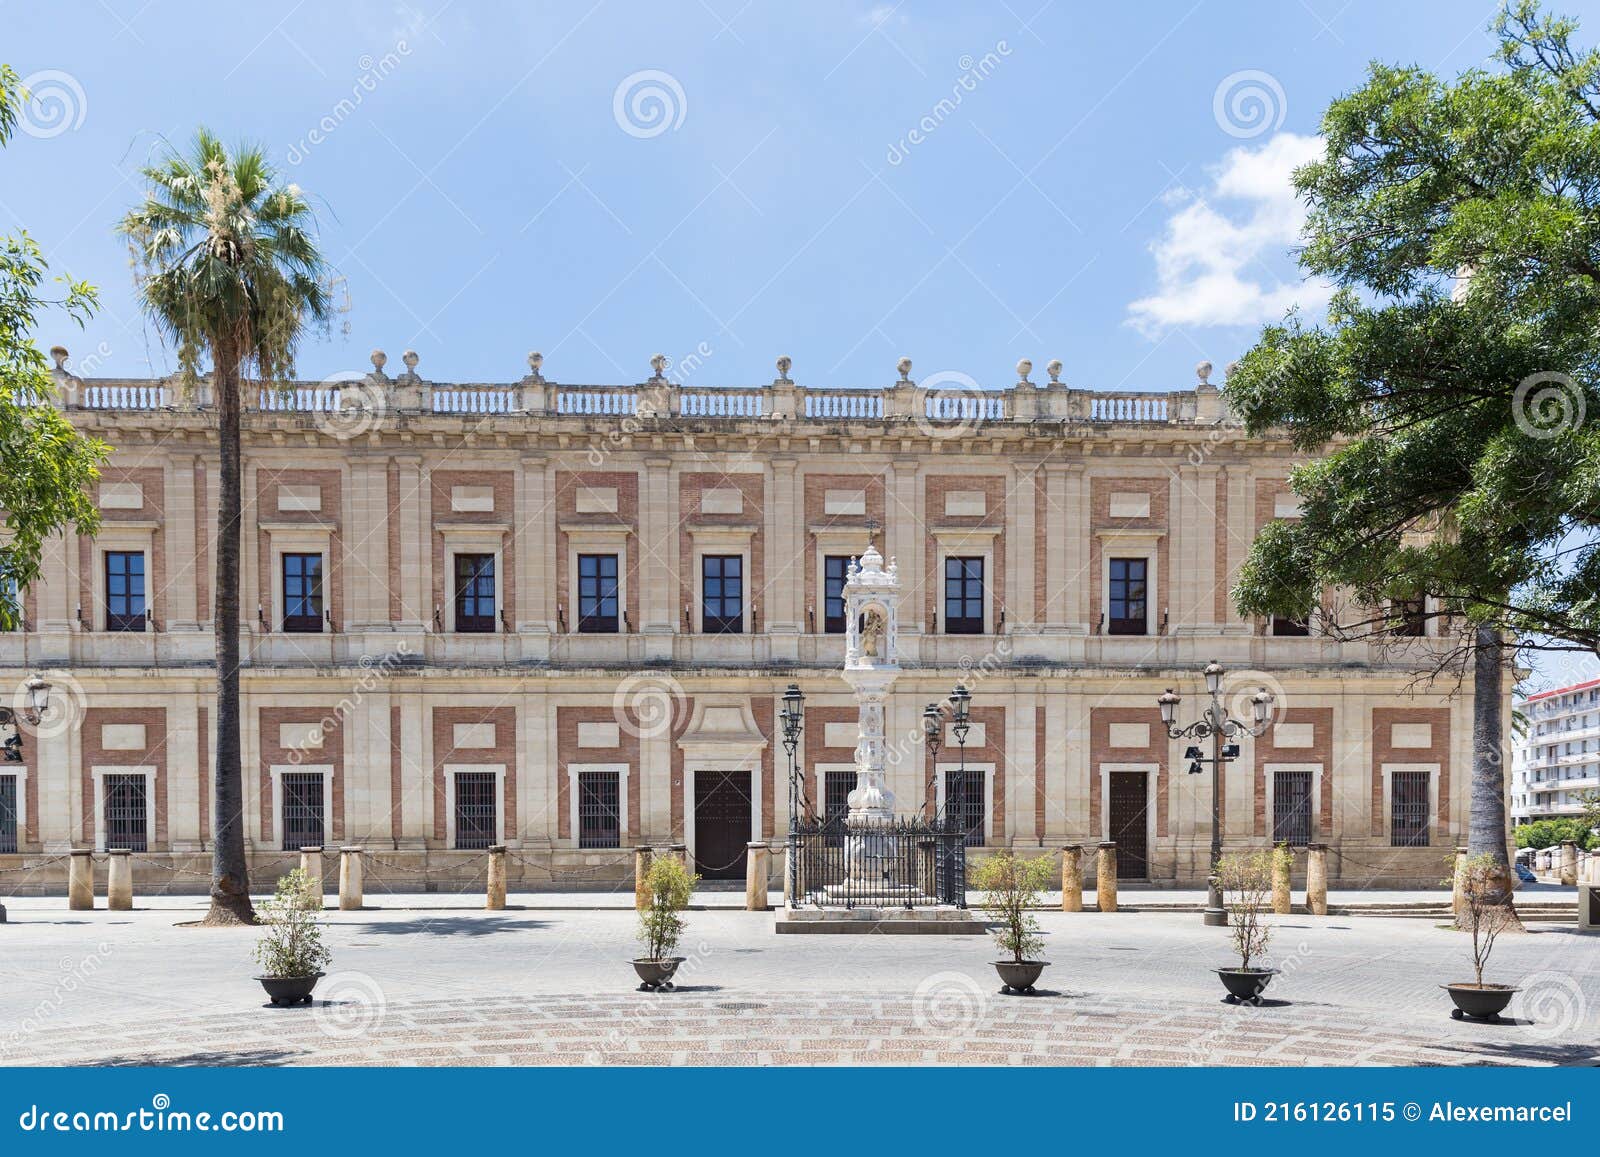 `archivo de indias` building , situated in the center of seville in triunfo square.